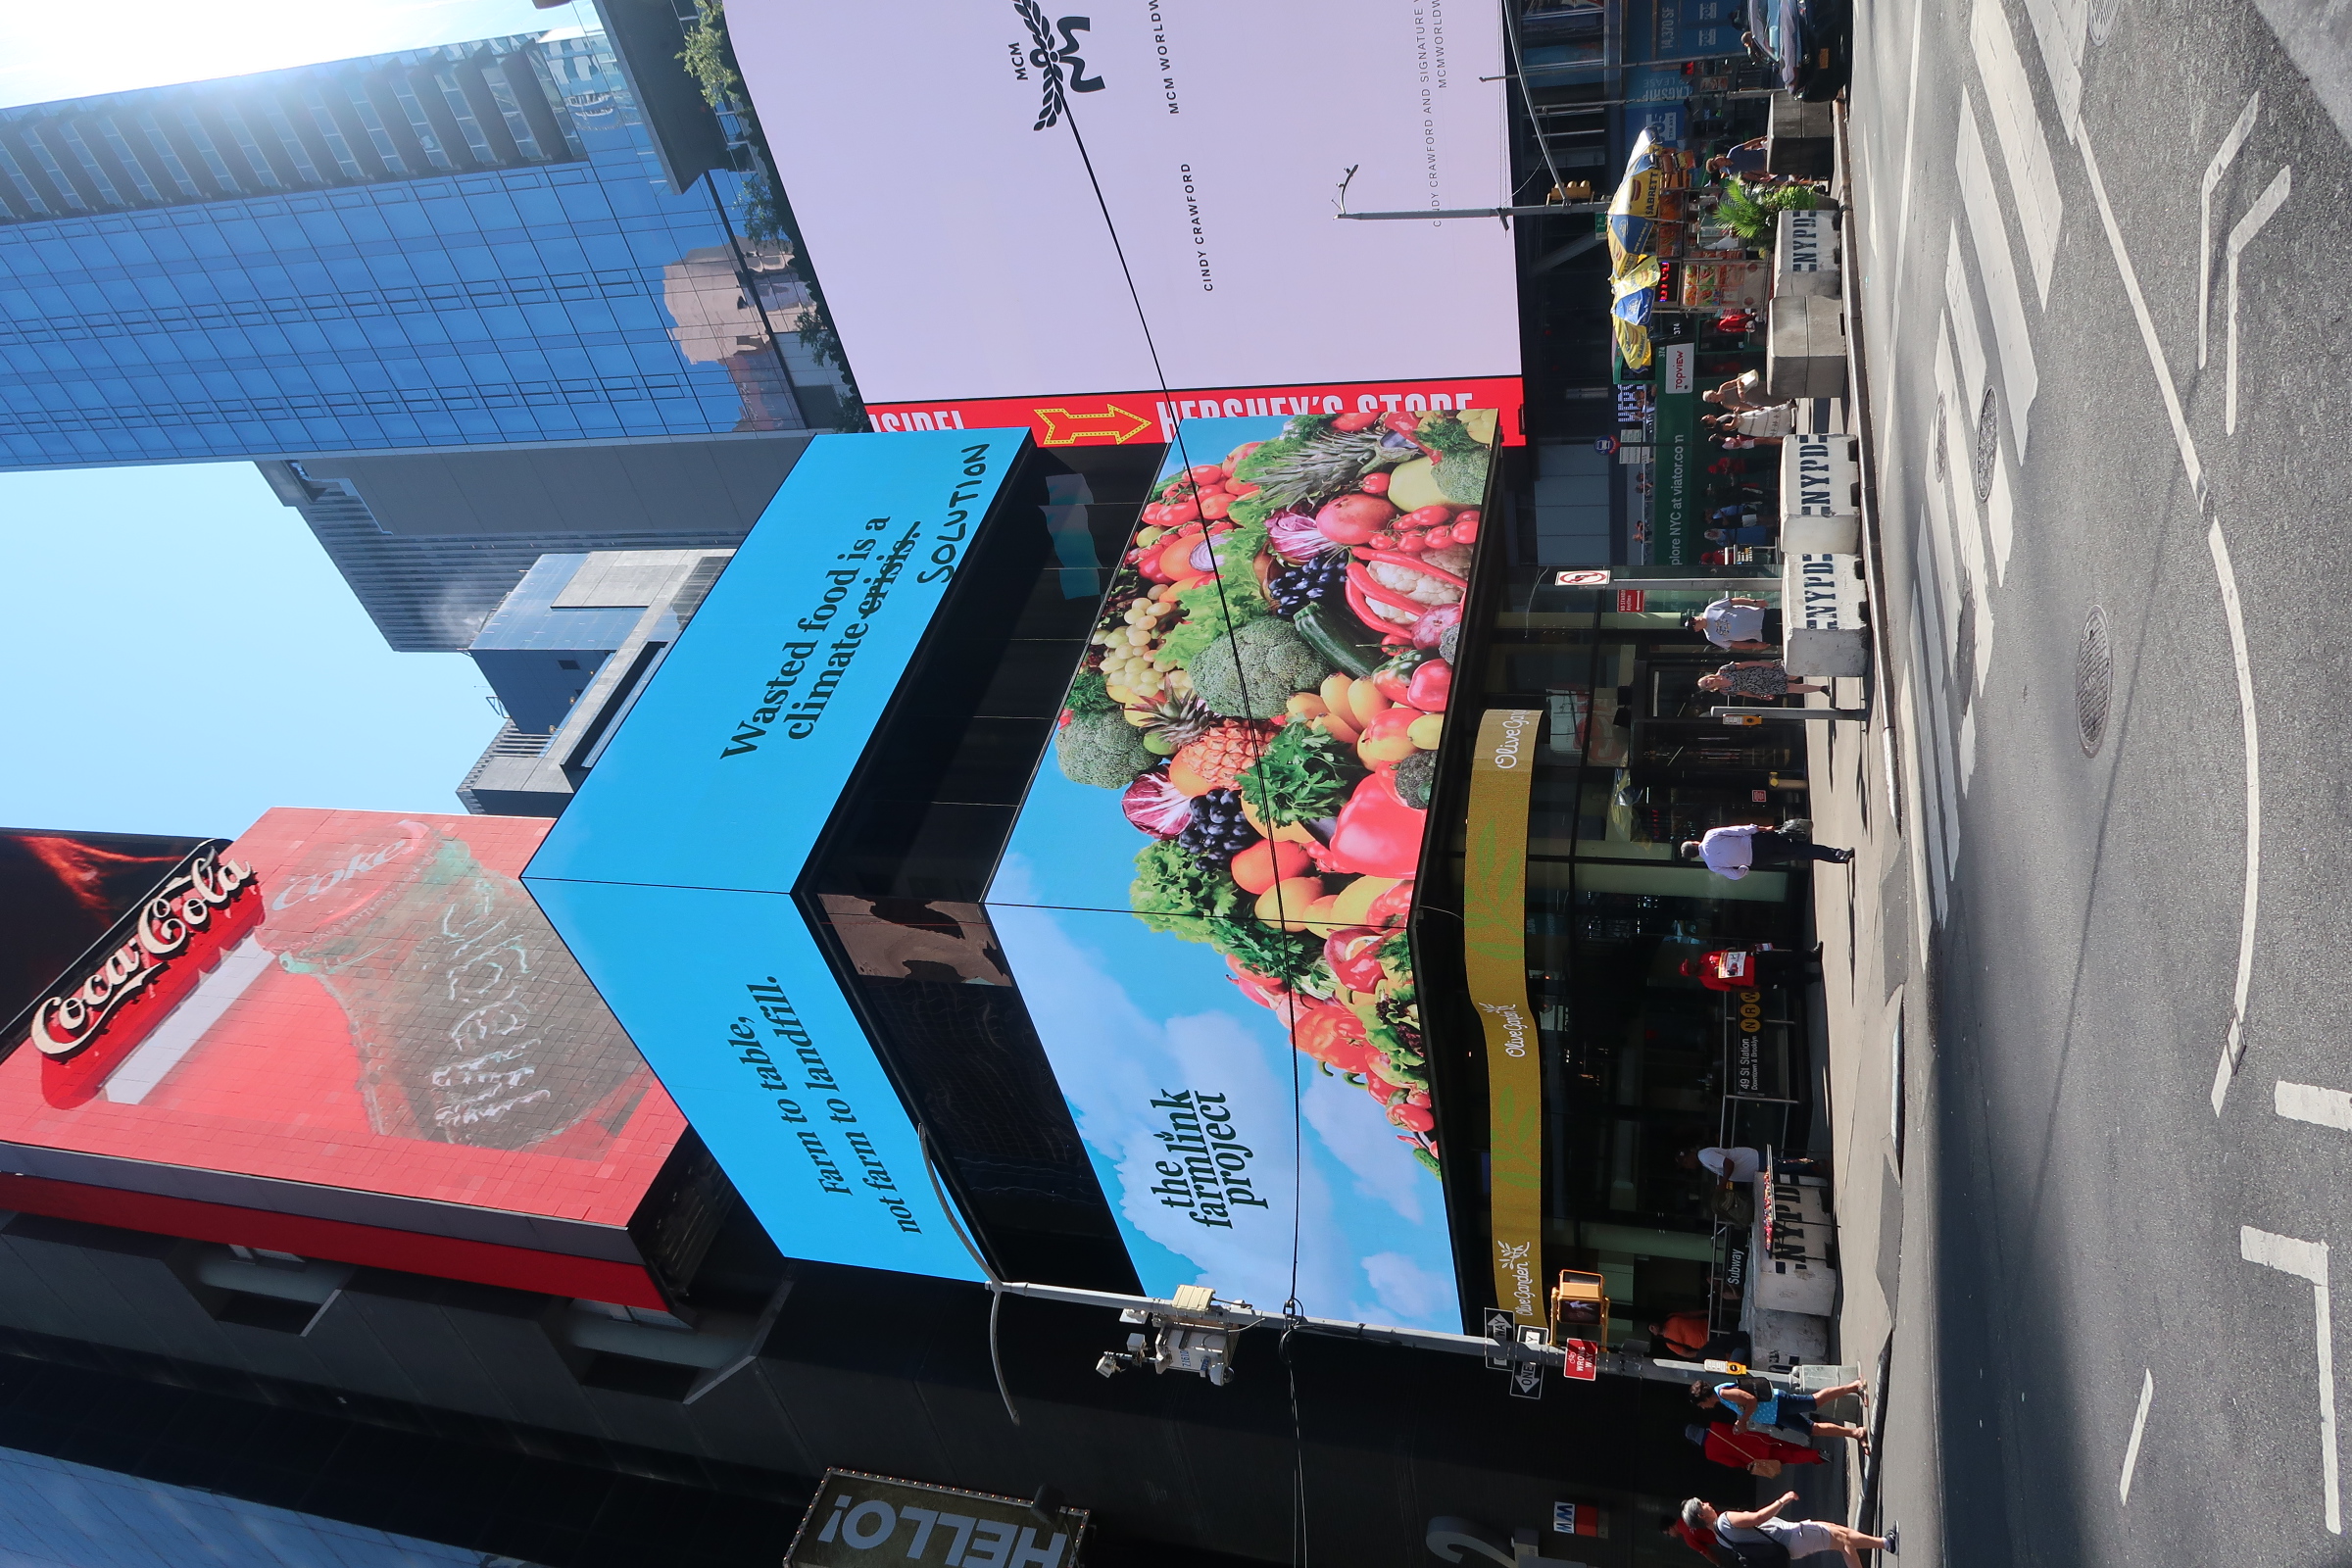 During New York City Climate Week the Farmlink Project got up a gigantic billboard in the middle of Times Square